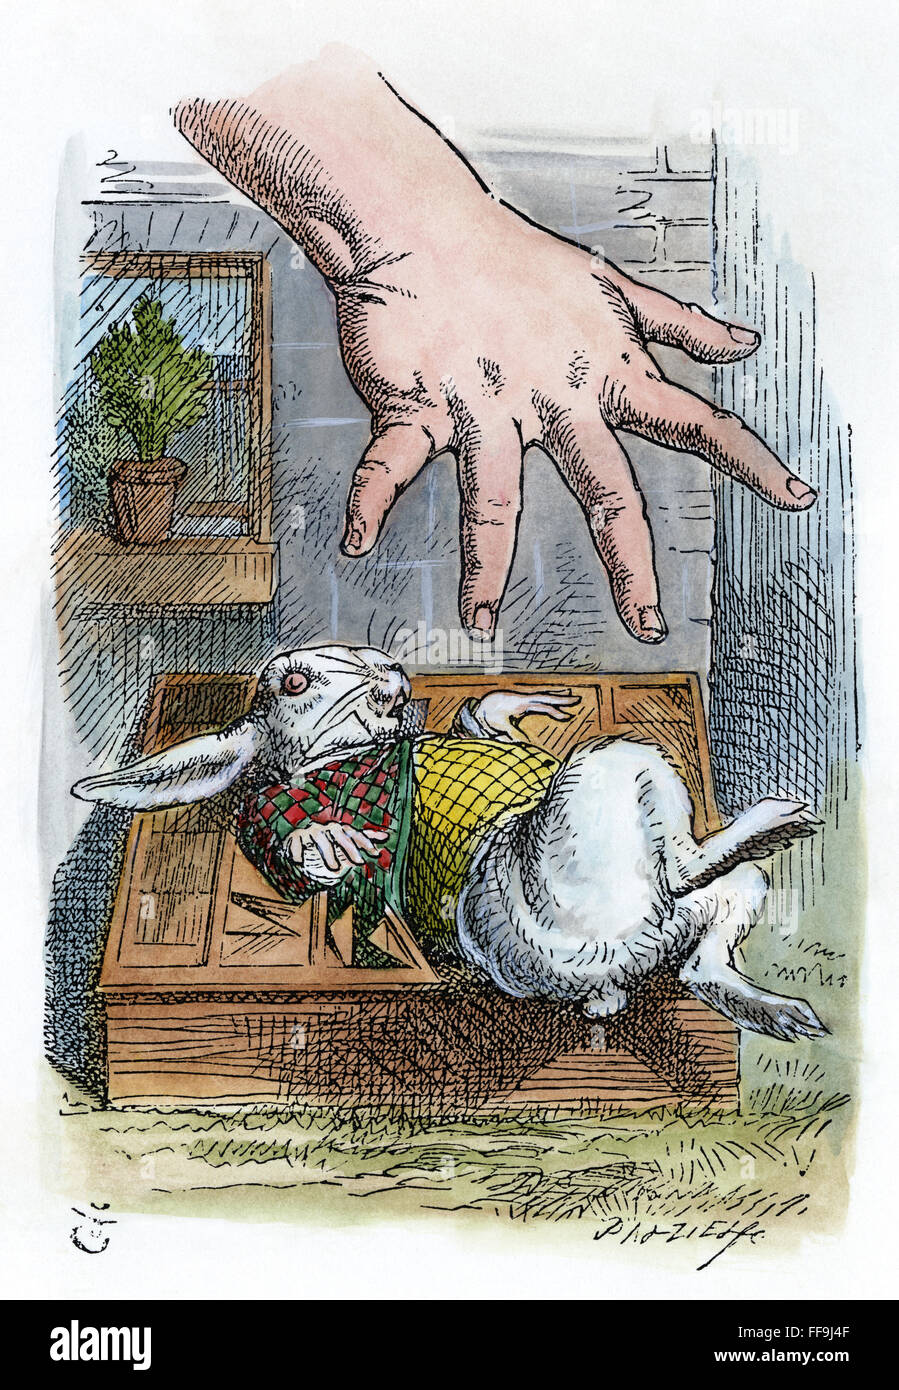 CARROLL: ALICE, 1865. /nAfter growing large, Alice reaches for the Rabbit. After the design by Sir John Tenniel for the first edition of Lewis Carroll's 'Alice's Adventures in Wonderland'. Stock Photo